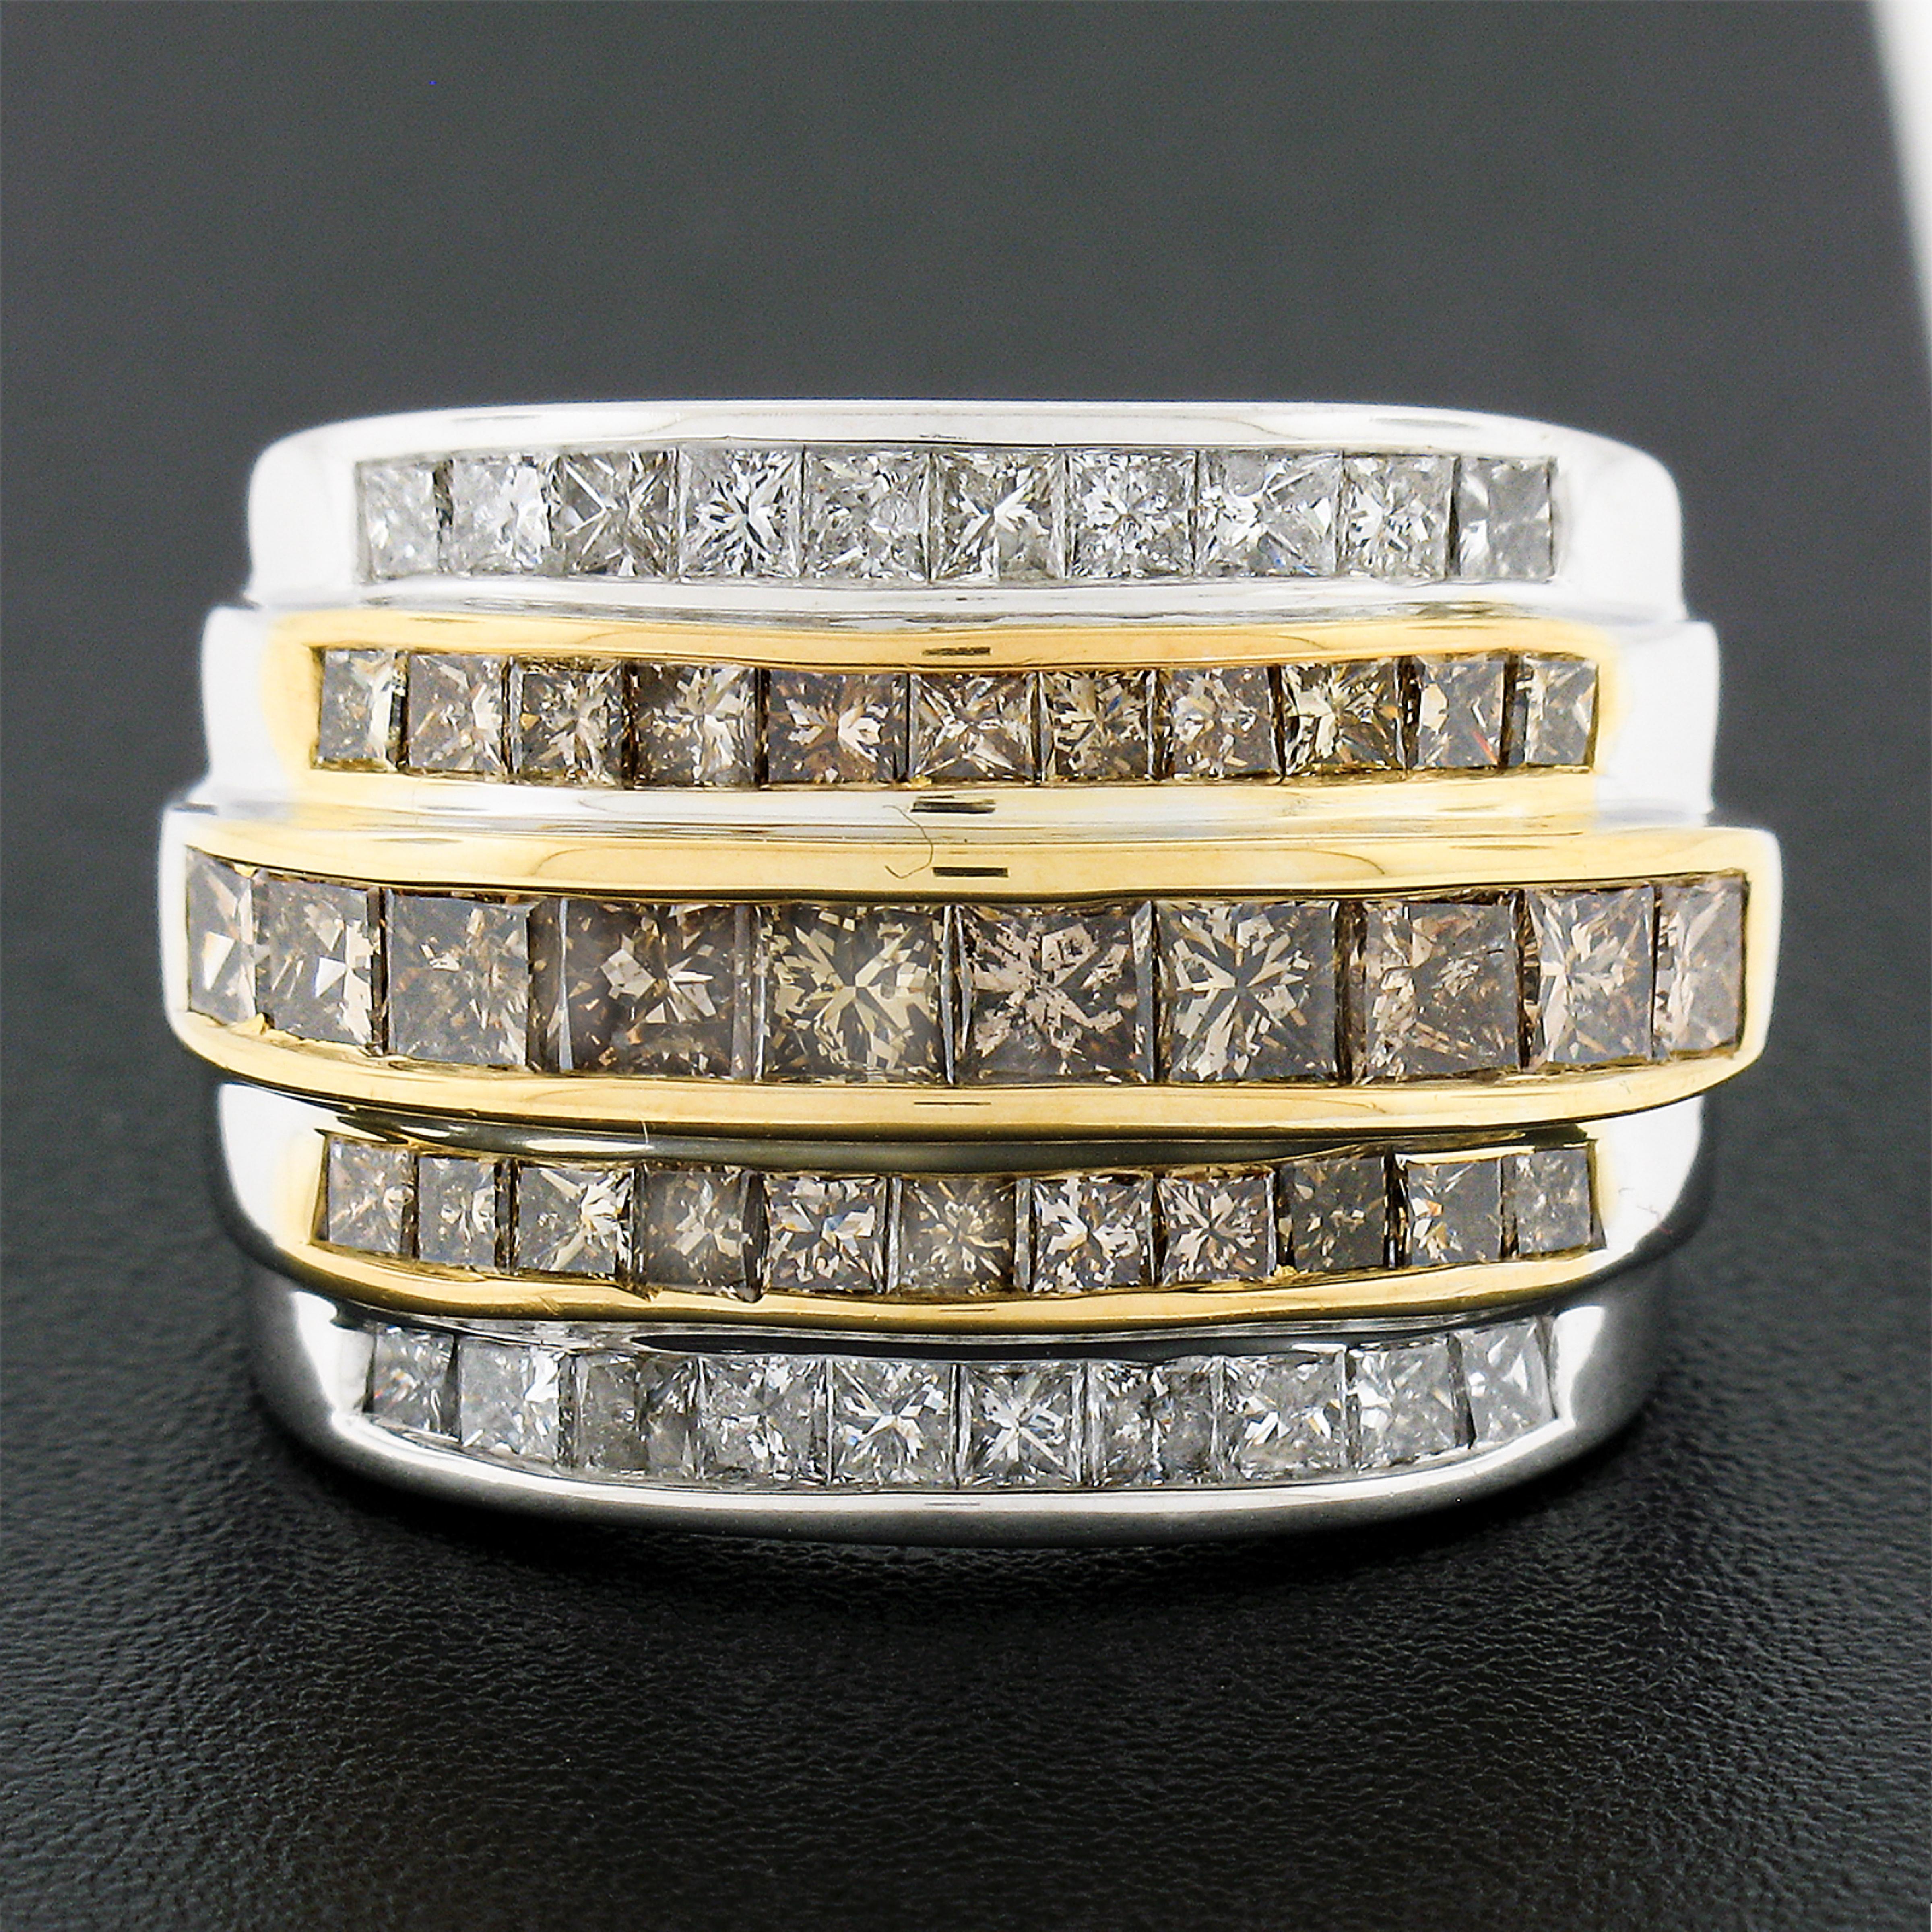 This magnificent and very well made diamond band ring was crafted from solid 14k white and yellow gold and features 5 tiered channels of fancy yellowish brown and white diamonds which total approximately 3.90 carats in weight. These diamonds are